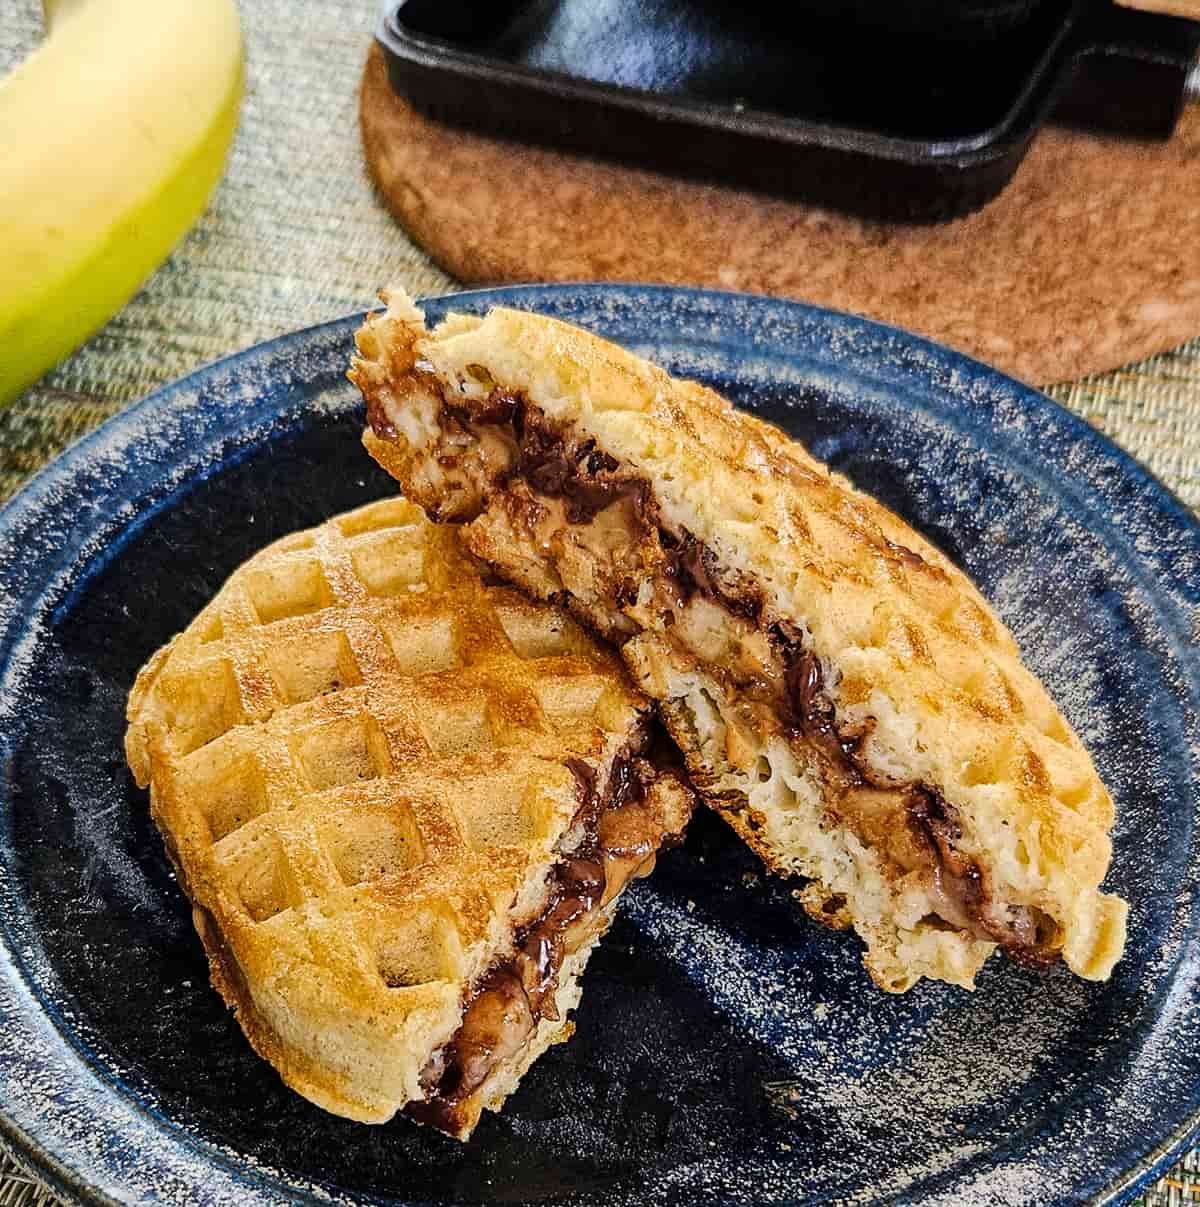 camping waffles with peanut butter and bananas cooked in a pie iron